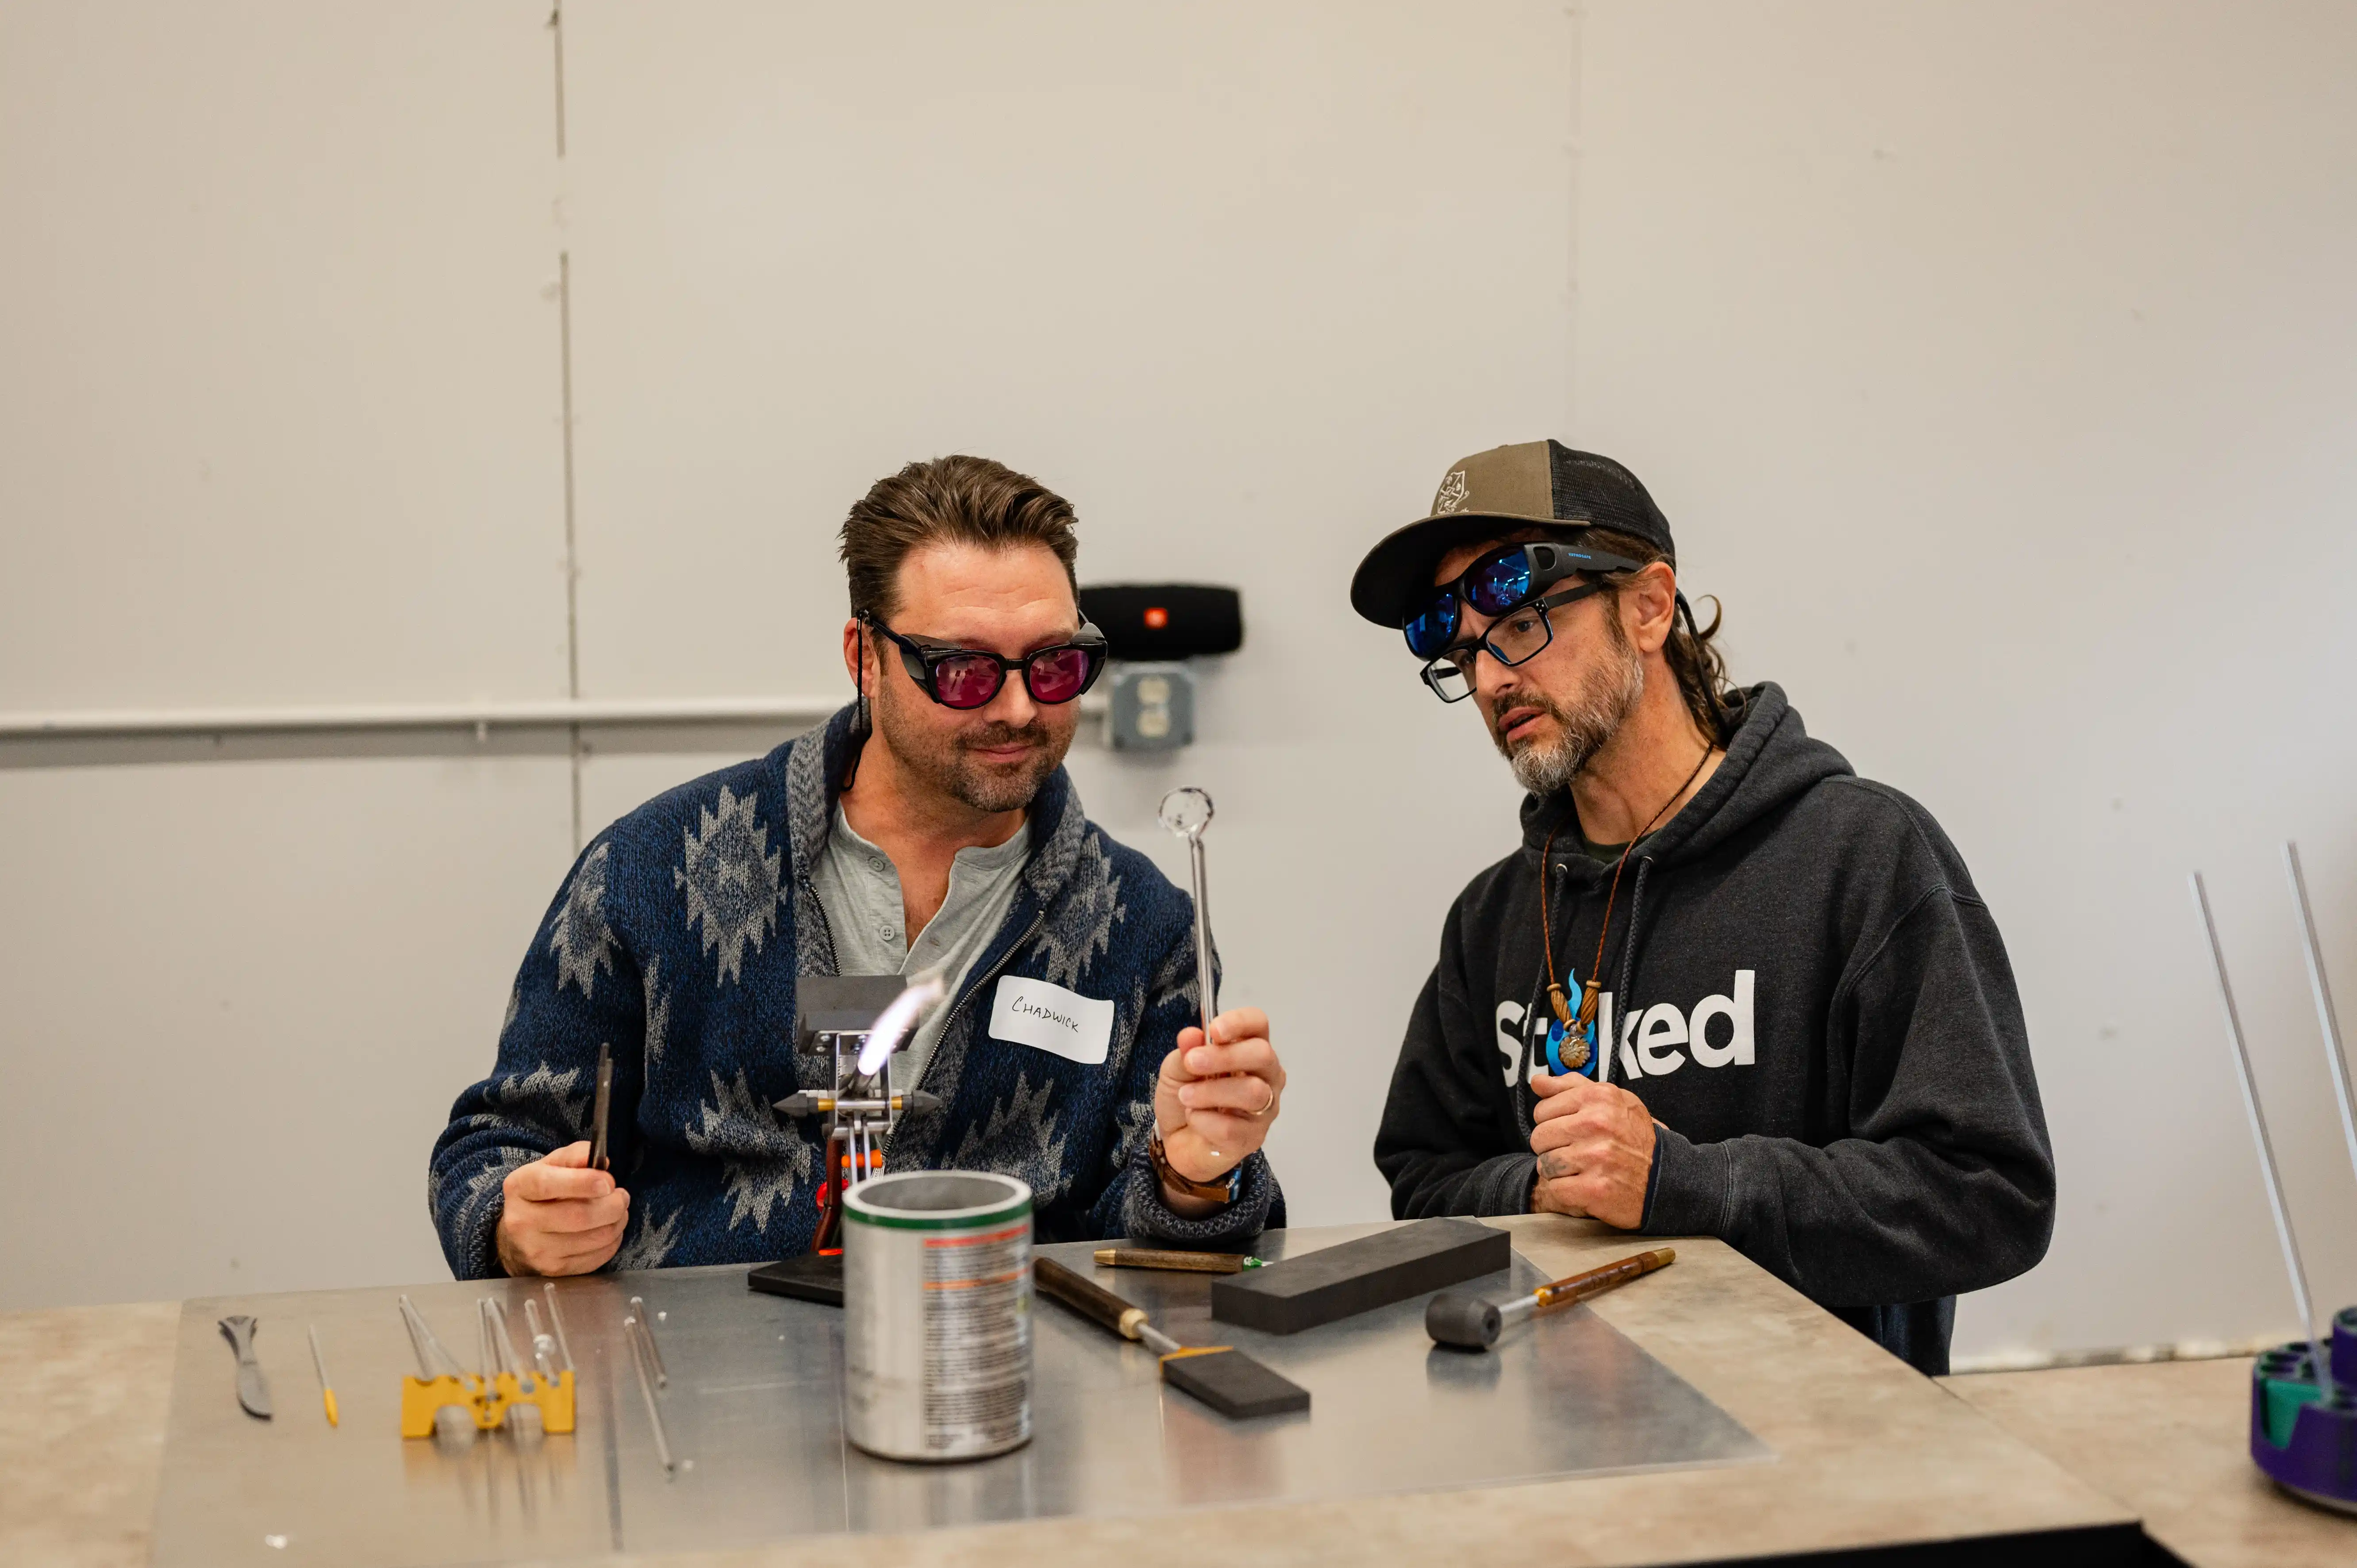 Two people wearing safety glasses working with glassblowing tools at a workshop table.